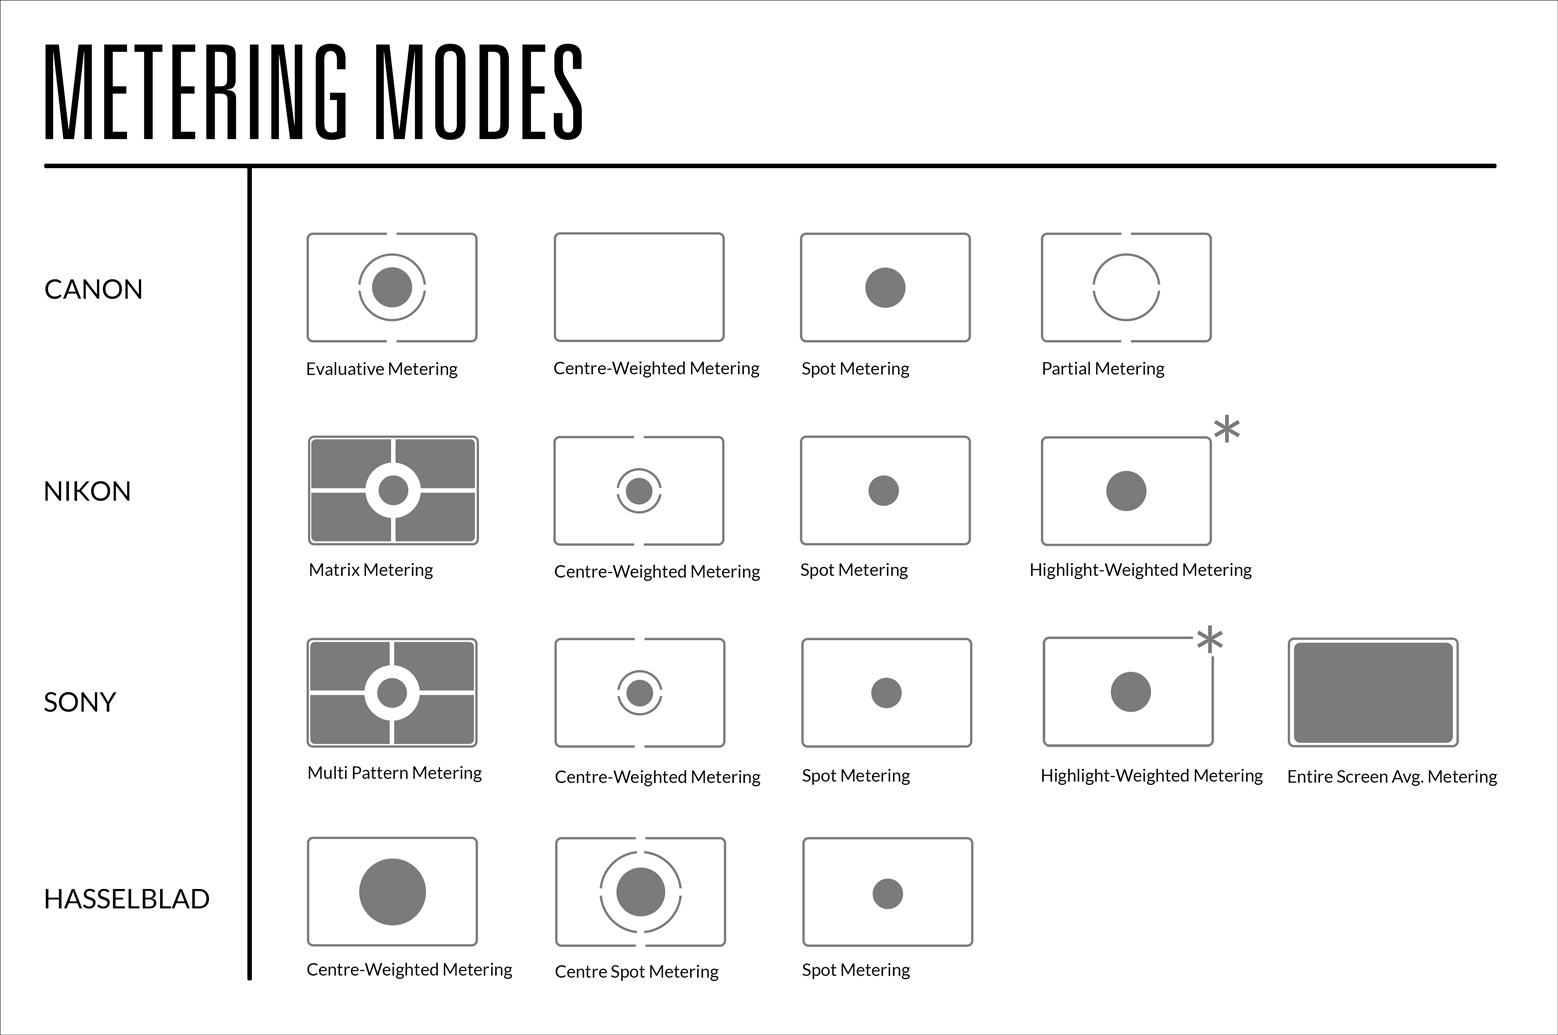 Table of metering mode icons for camera manufacturers